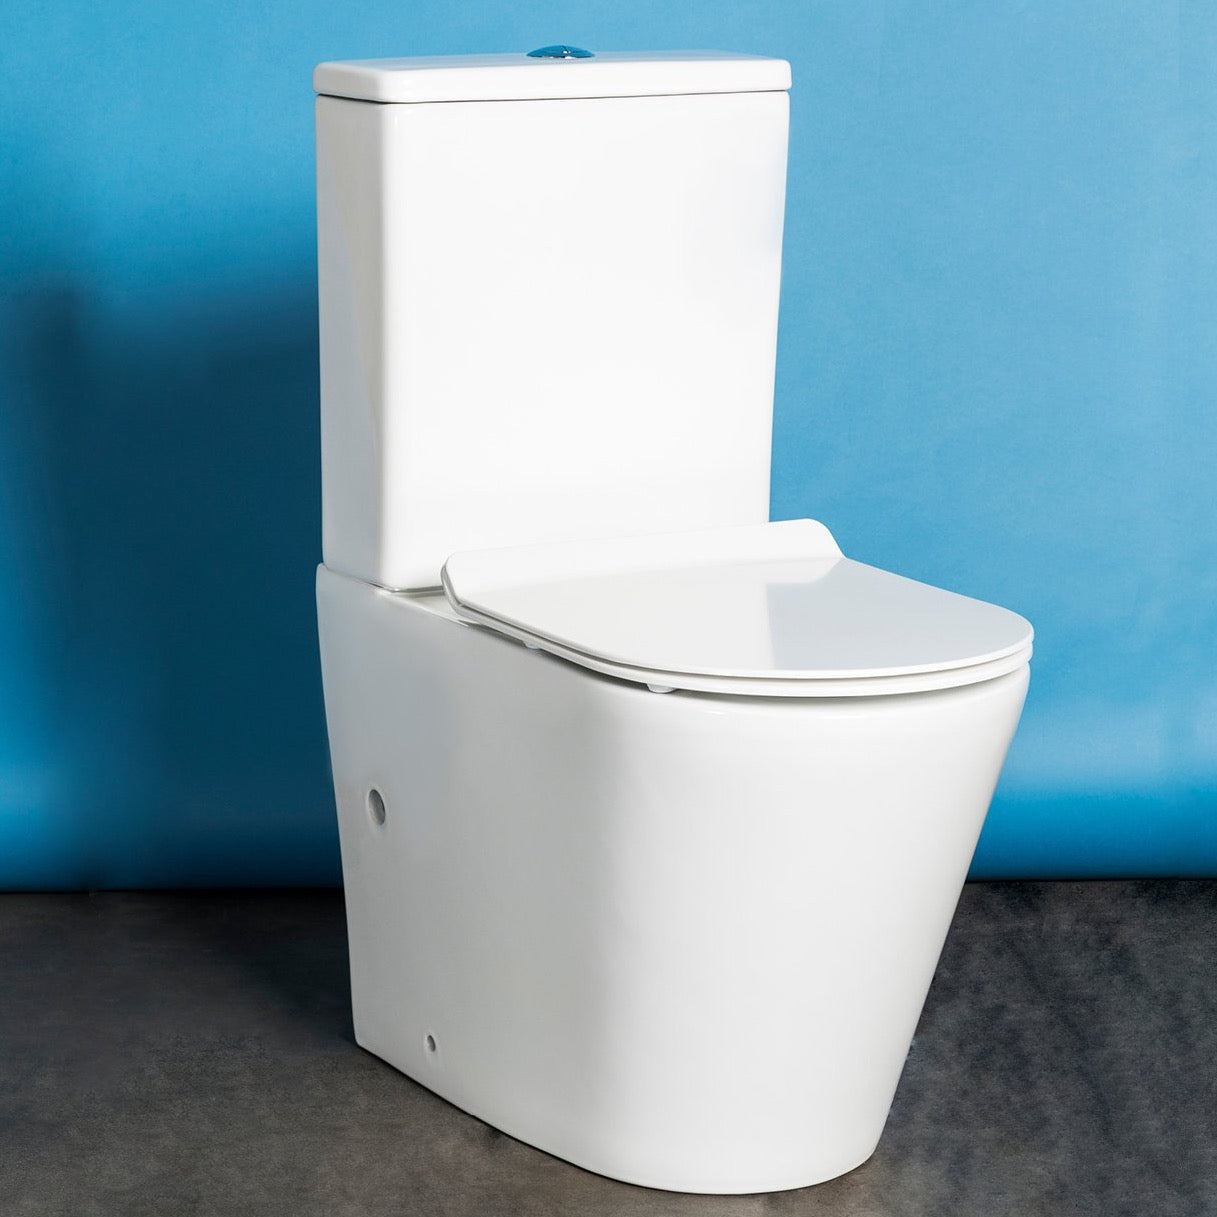 The Eyre Rimless Wall-Faced Two-Piece Toilet Ex-Display